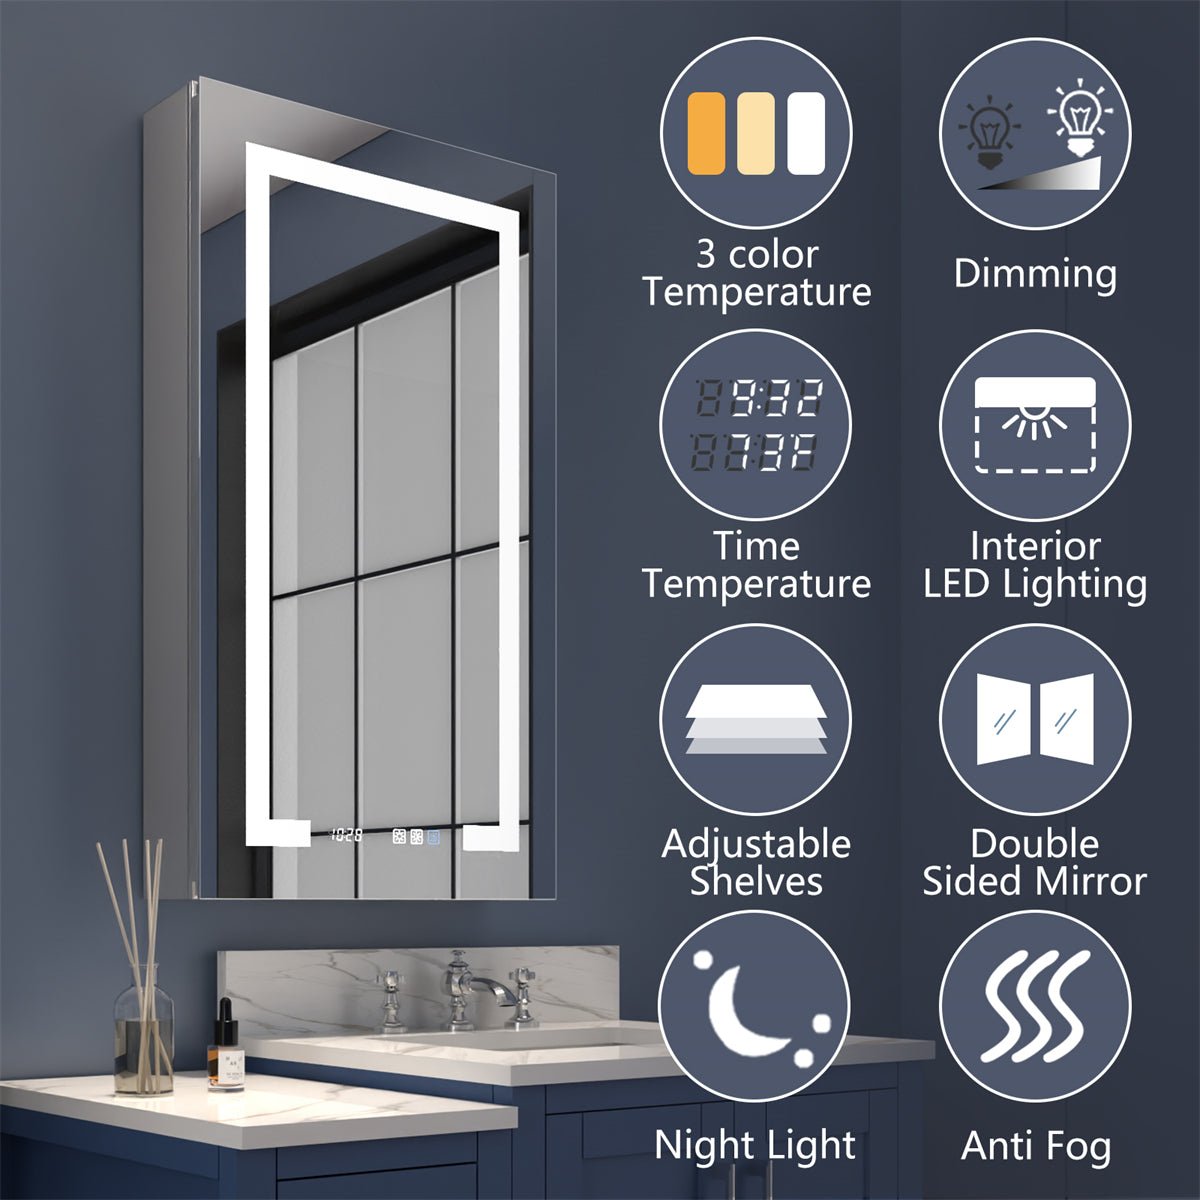 Boost-M2 20" W x 36" H LED Lighted Bathroom Medicine Cabinet with Mirror and Clock - ExBriteUSA